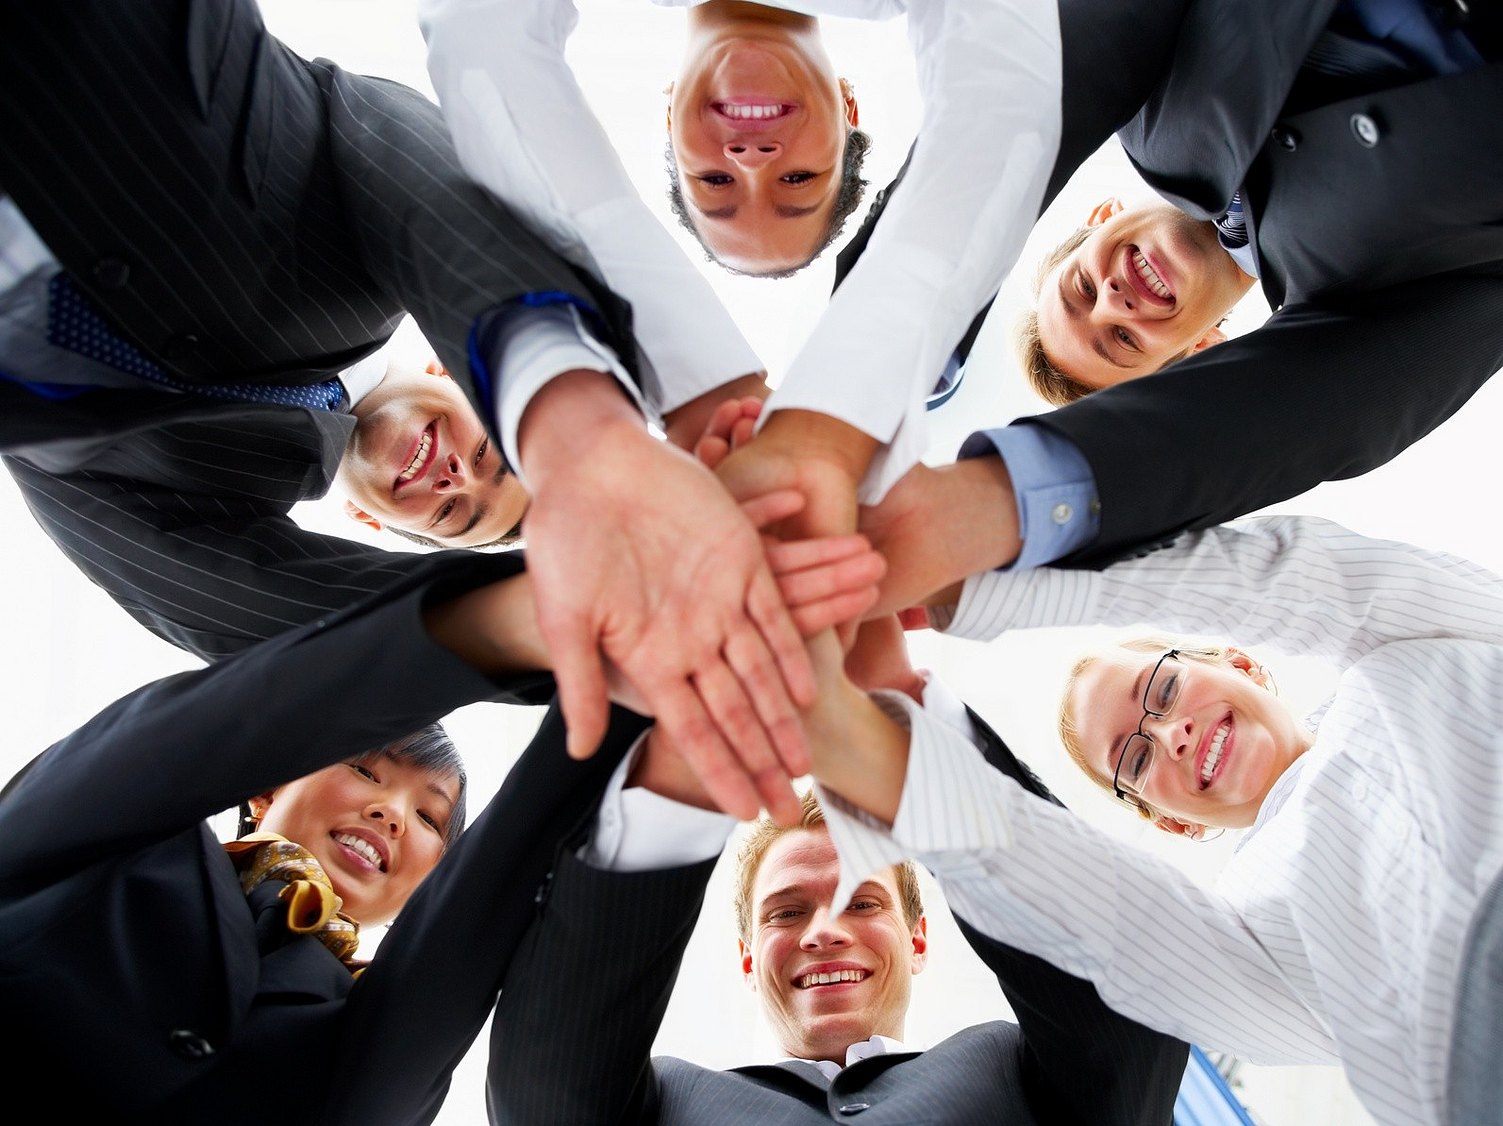 Do You Know What Is Team Building and Its Benefits